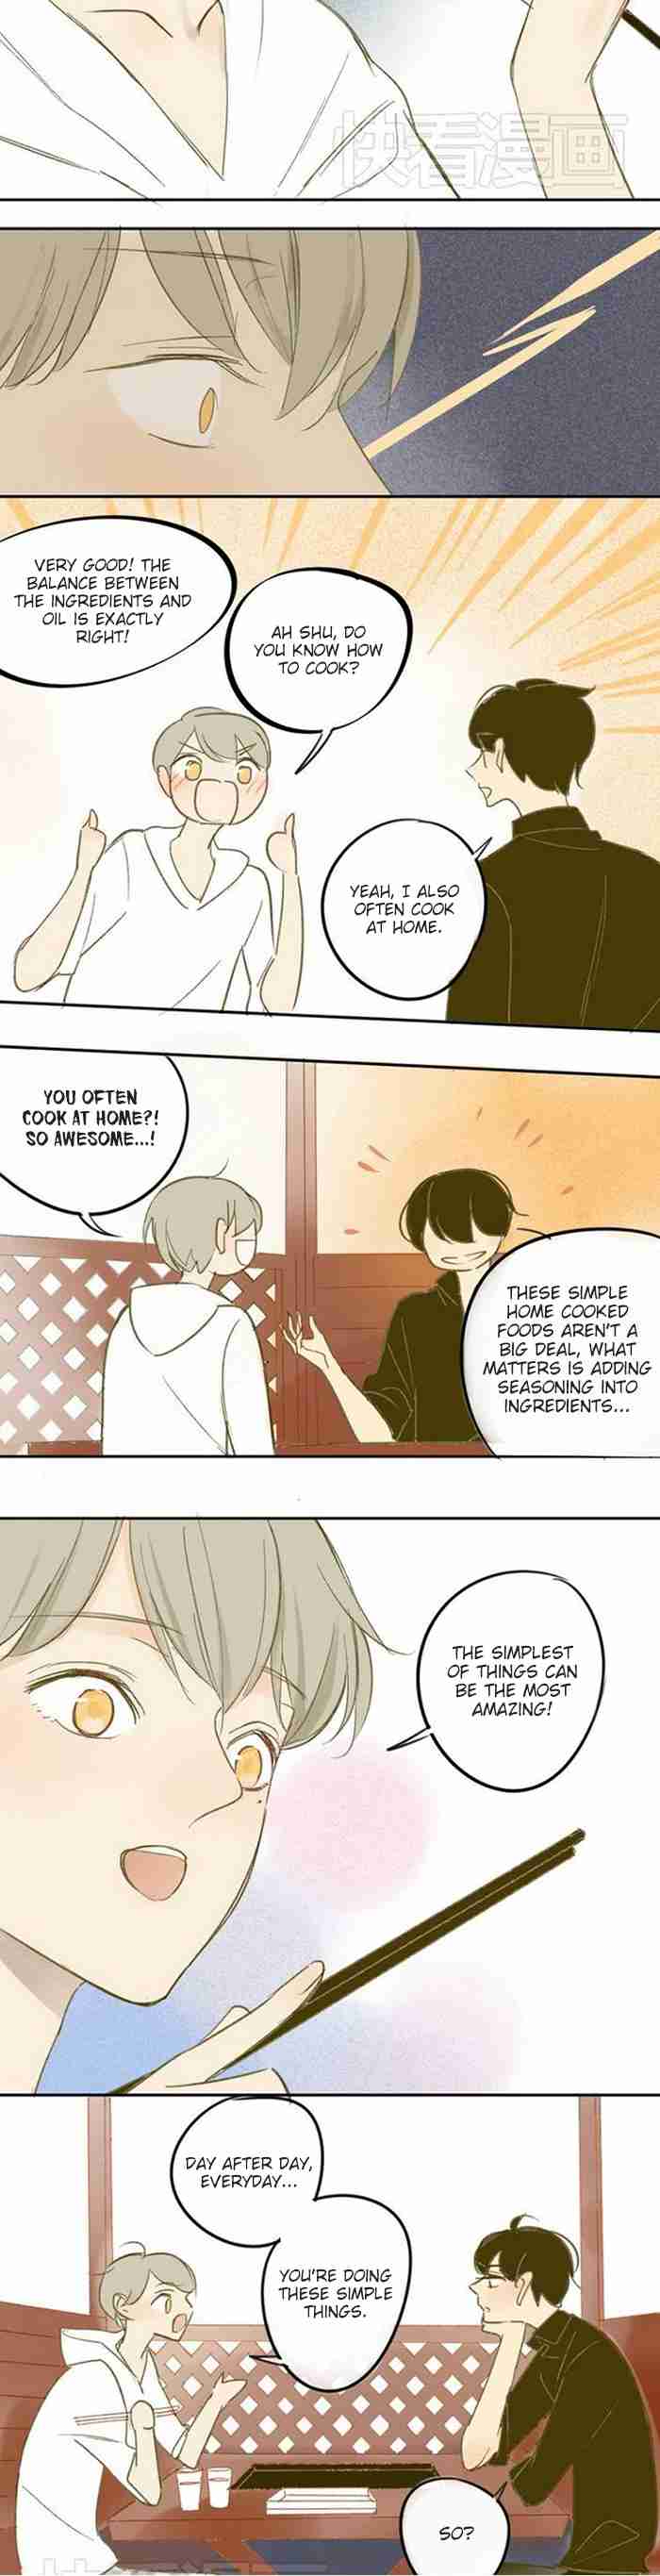 Classmate Relationship? Ch. 62 Don't drink alcohol